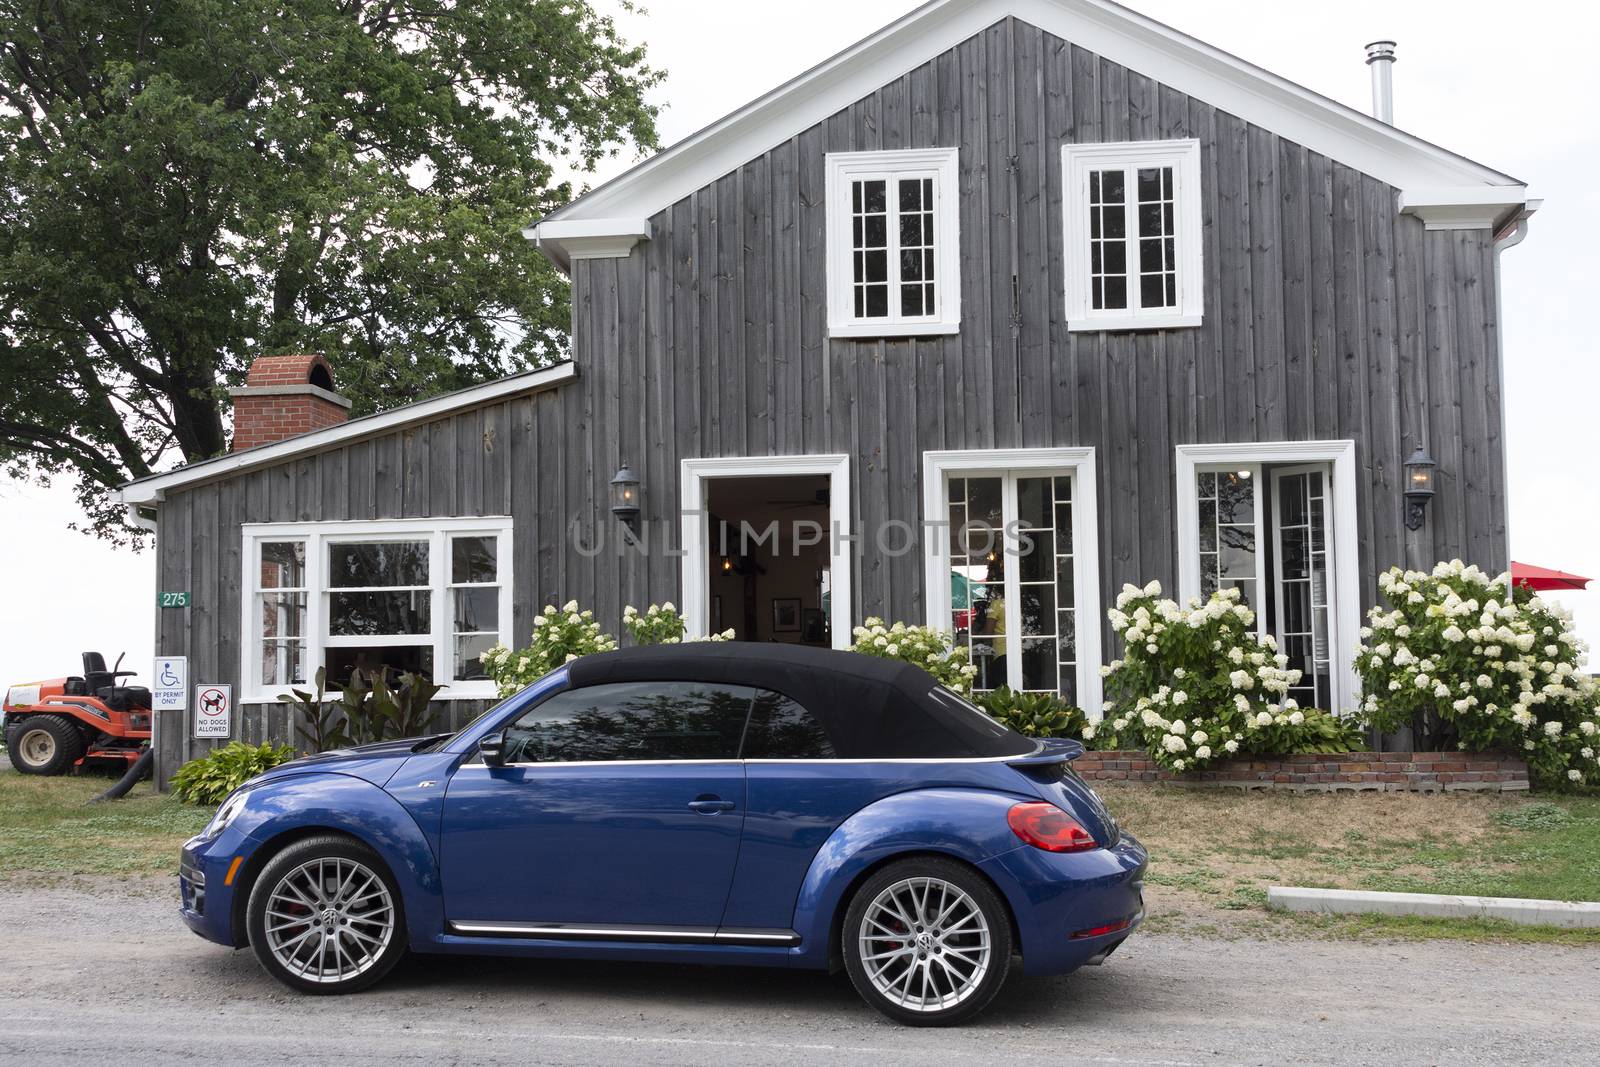 Rustic, home restaurant and shop building and a car near the entrance